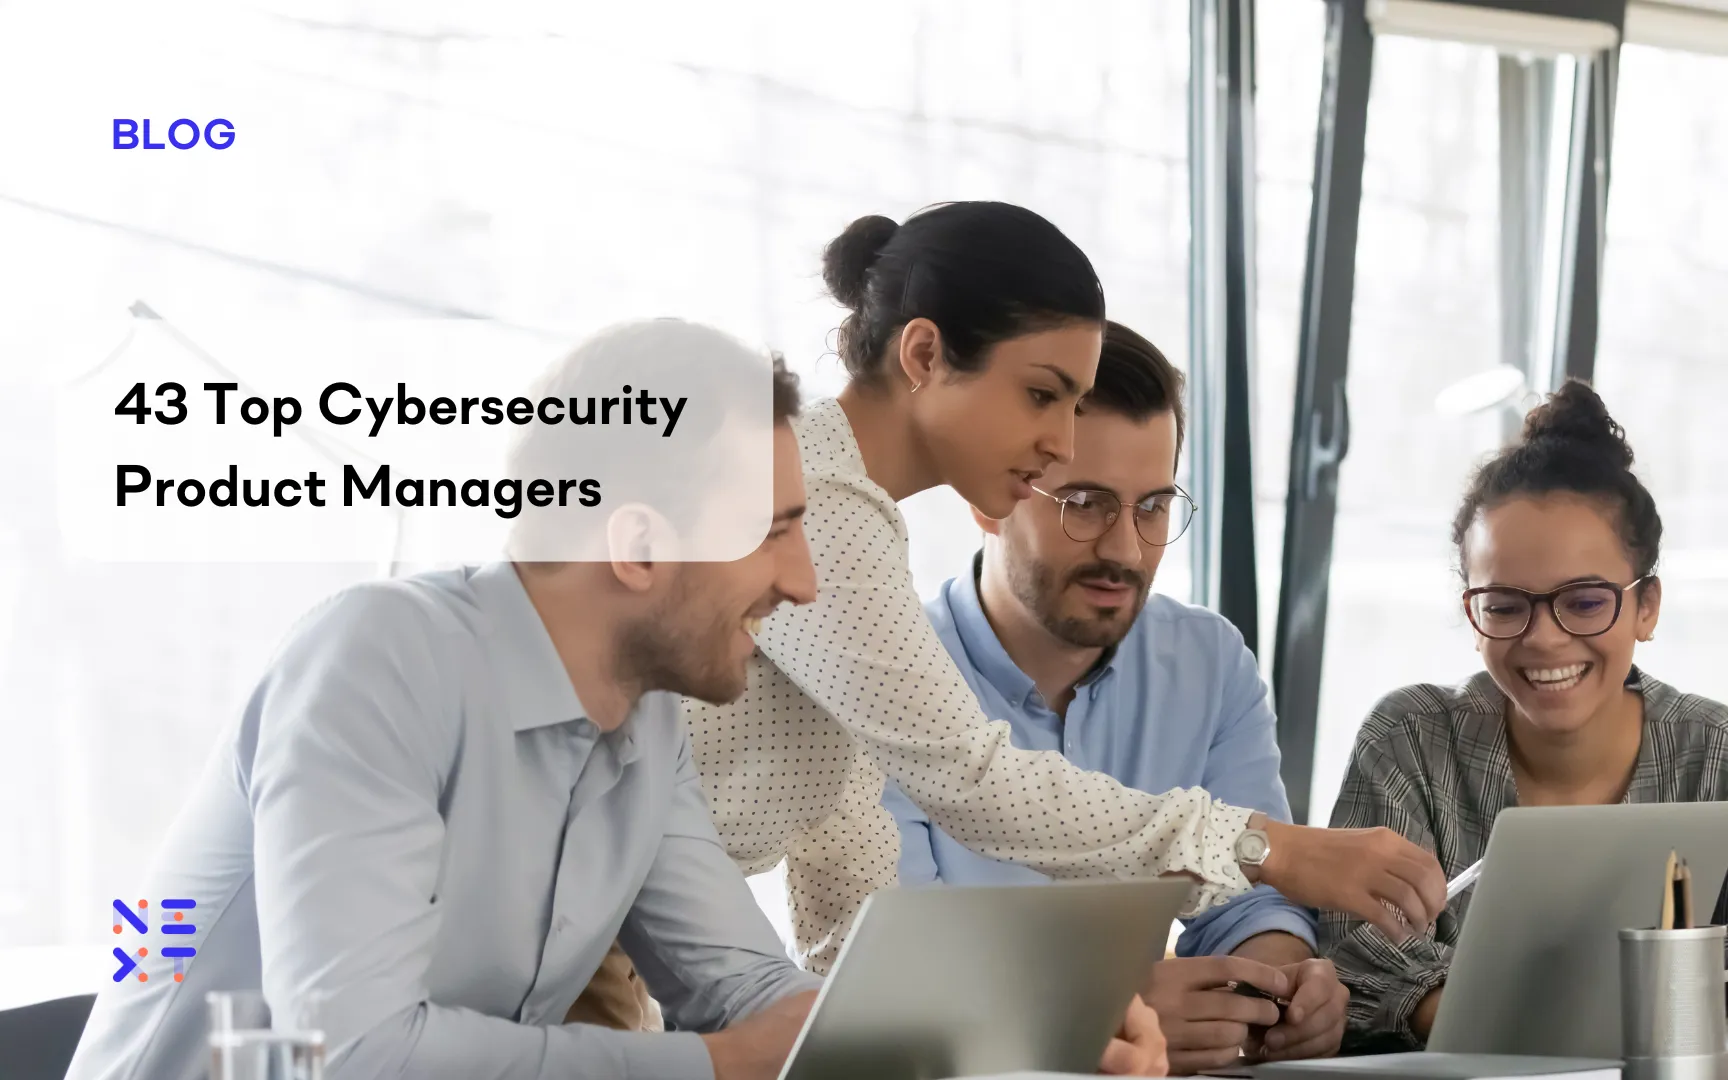 43 Top Cybersecurity Product Managers